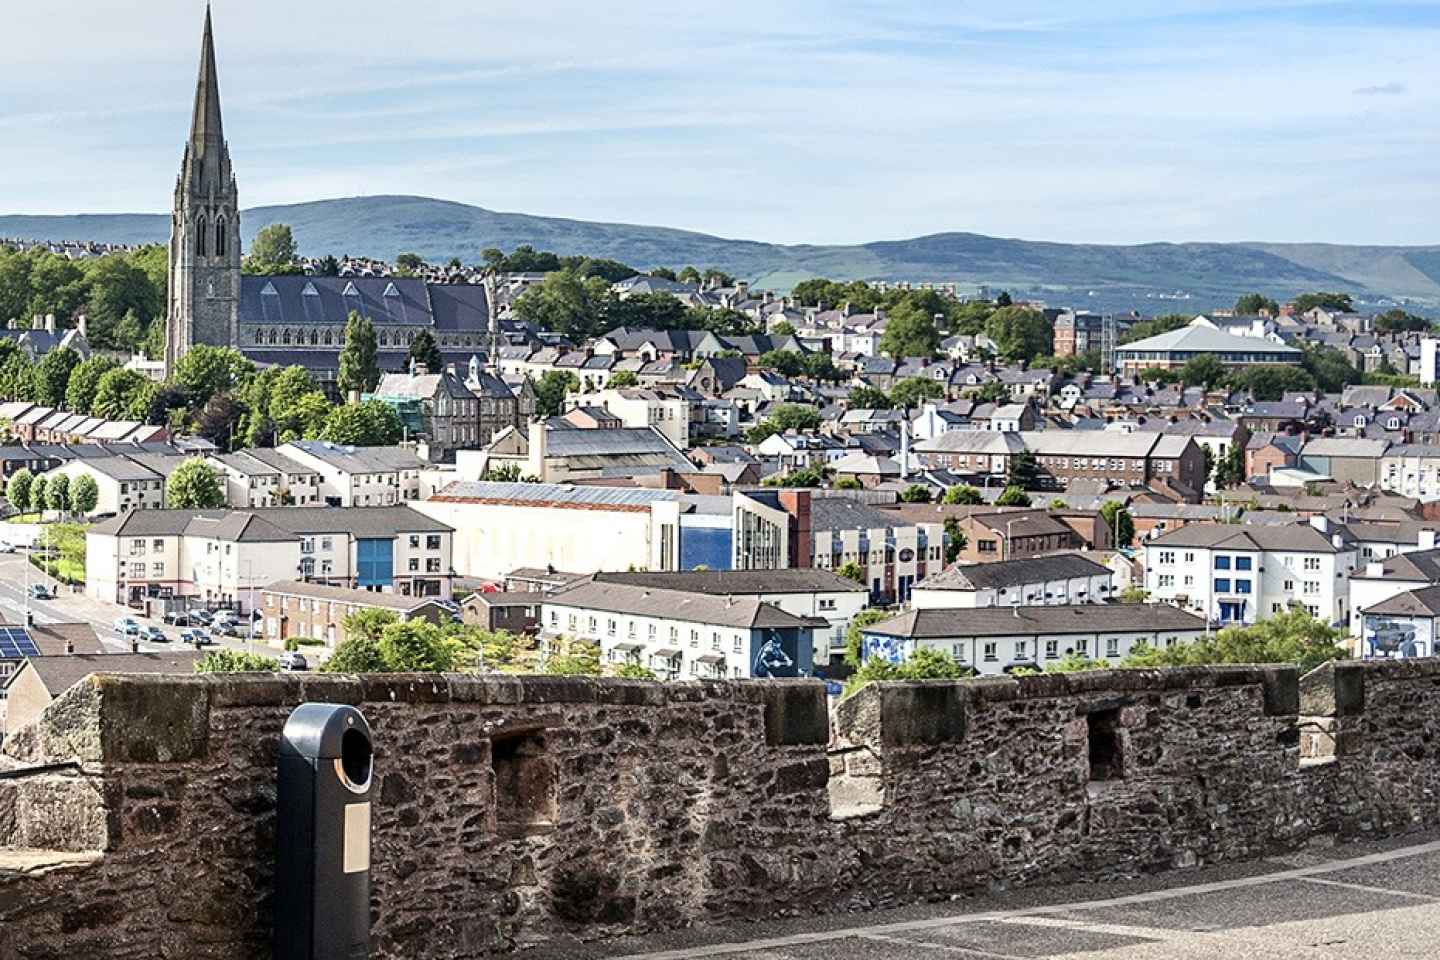 Derry: Historical Self-Guided Audio Walking Tour